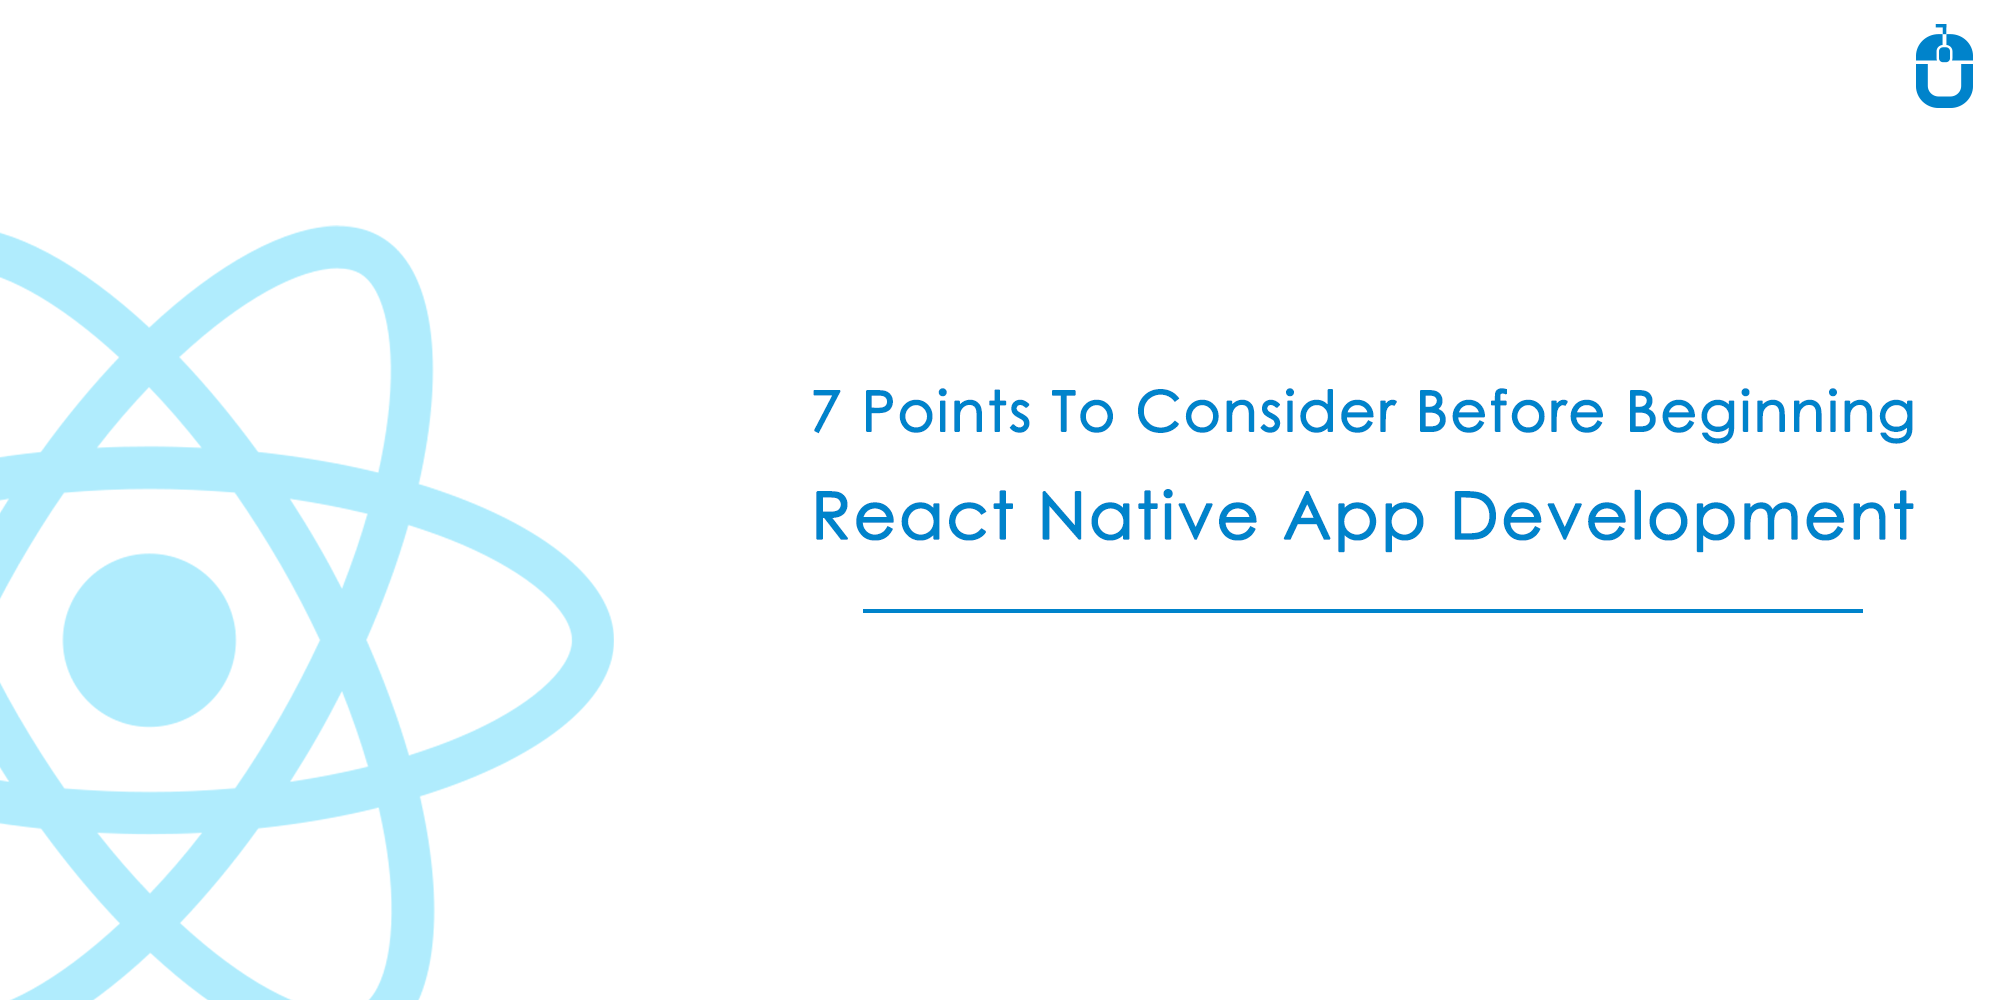 7 Points To Consider Before Beginning React Native App Development